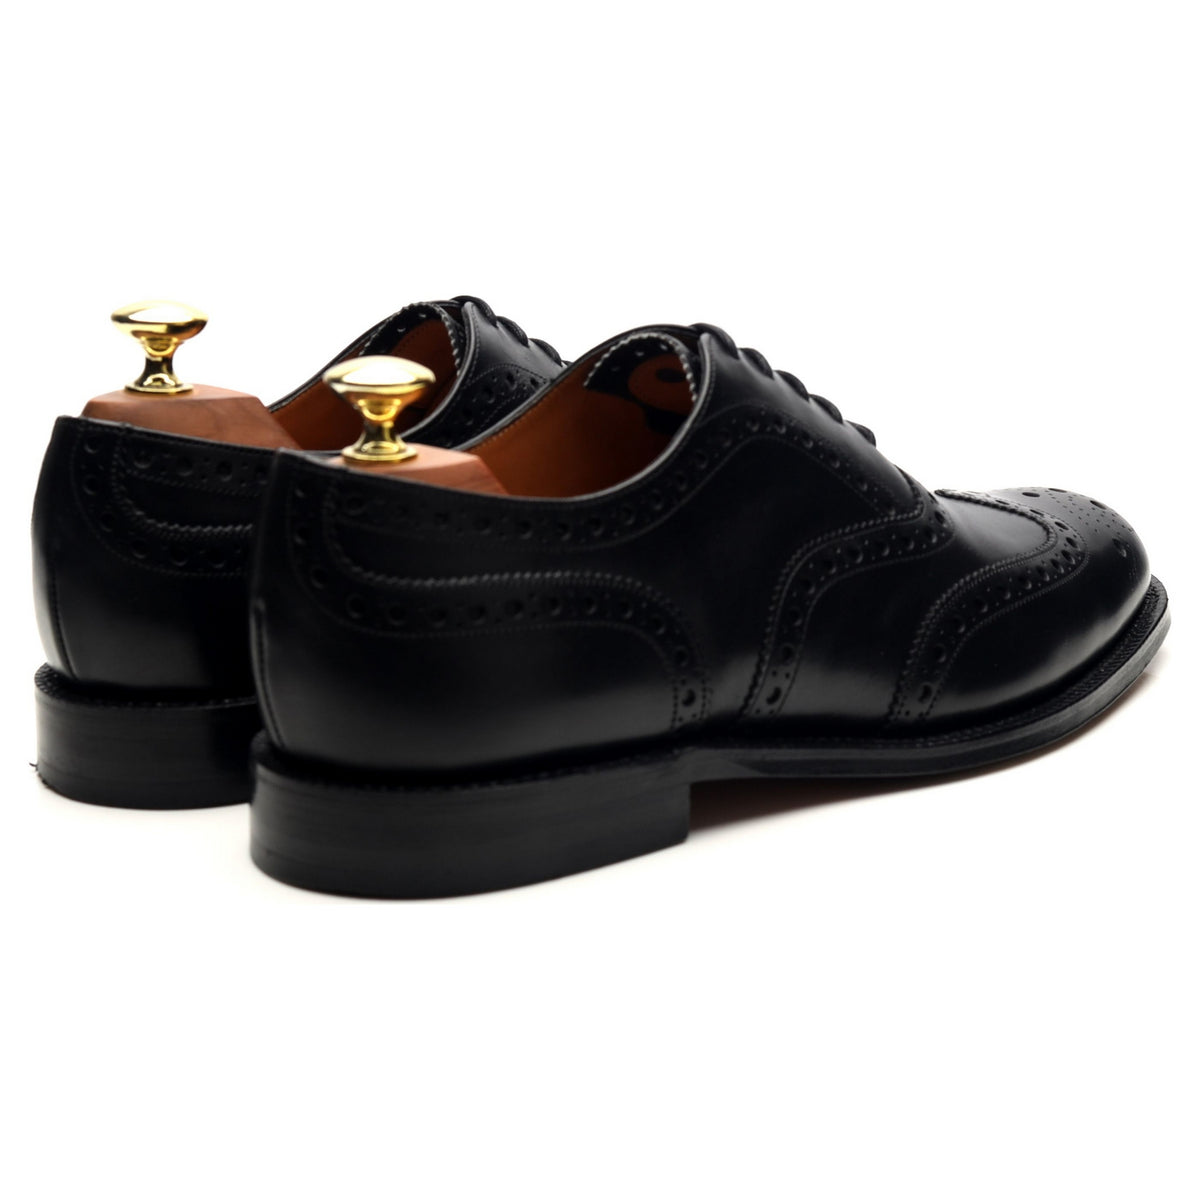 Black Leather Oxford Brogues UK 7.5 G